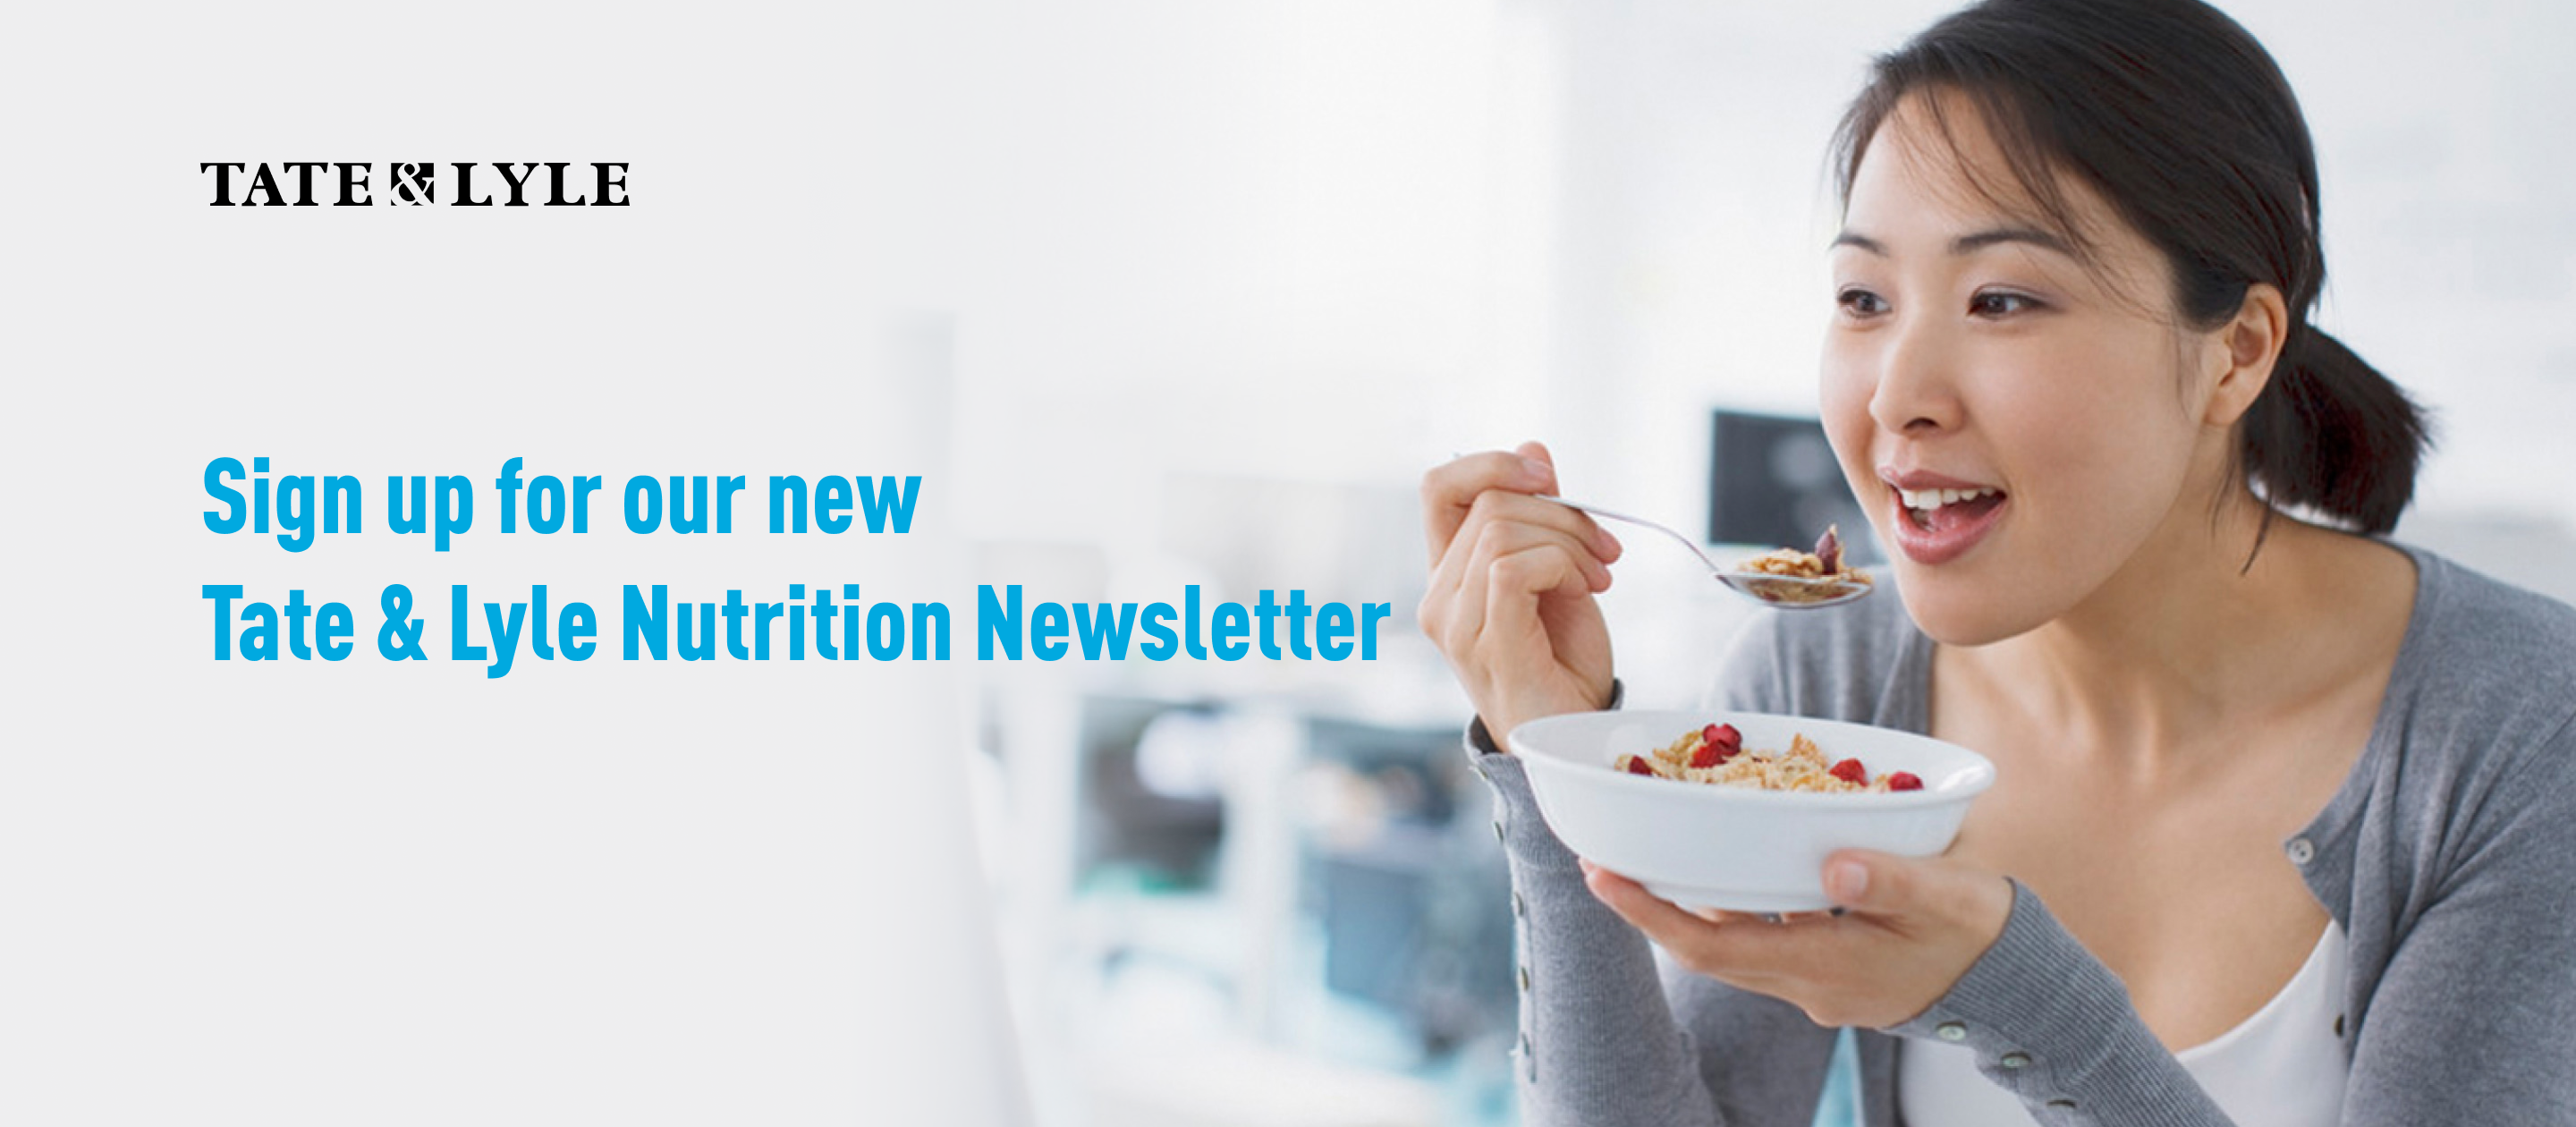 Sign up for our new Tate & Lyle newsletter.